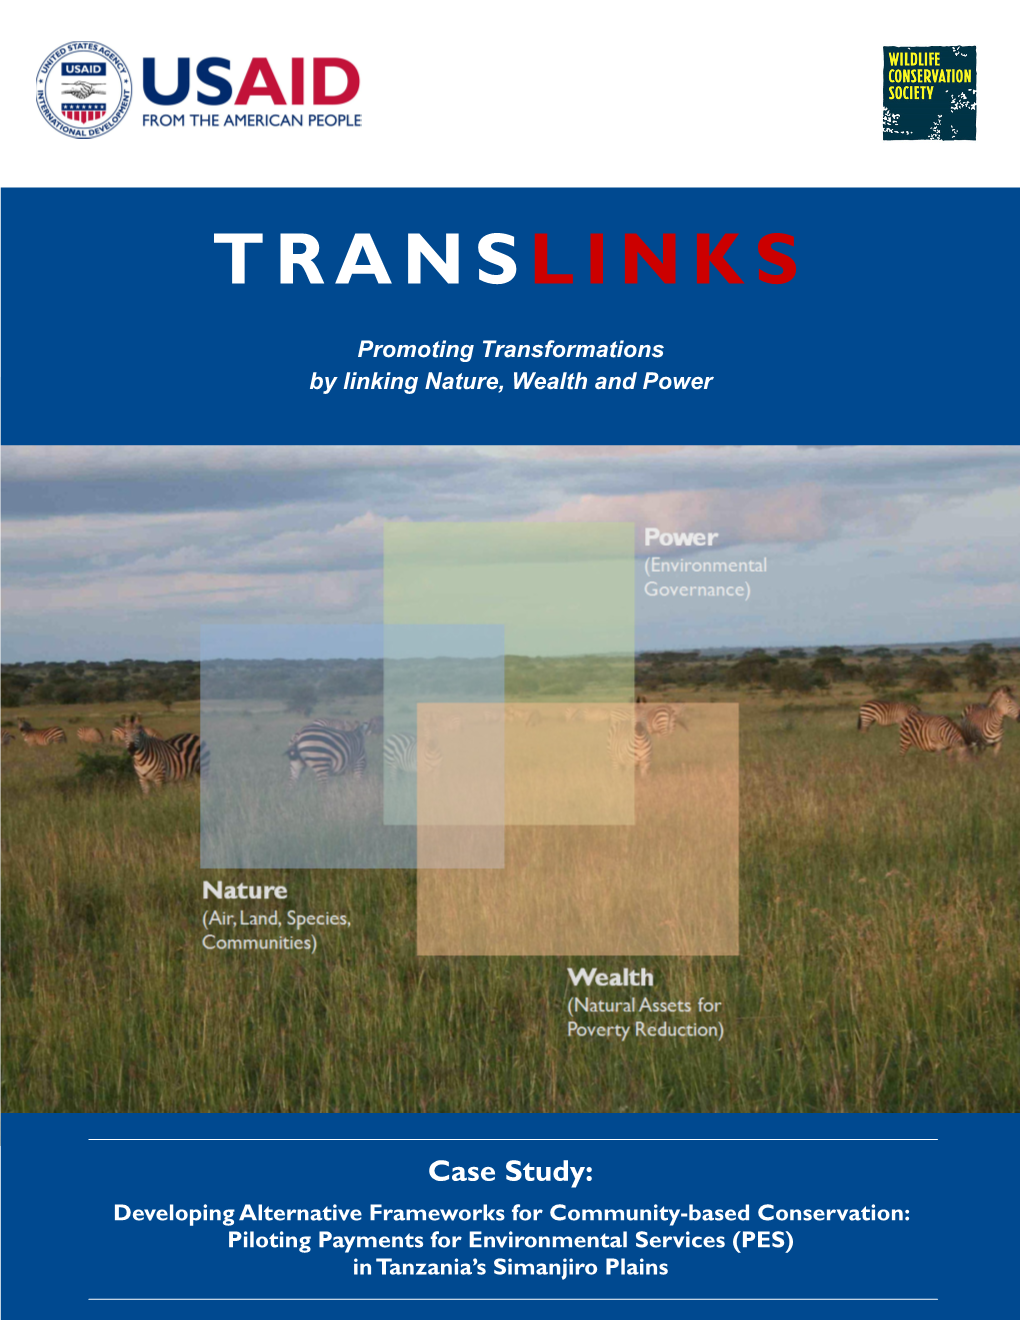 Case Study: Developing Alternative Frameworks for Community-Based Conservation: Piloting Payments for Environmental Services (PES) in Tanzania’S Simanjiro Plains